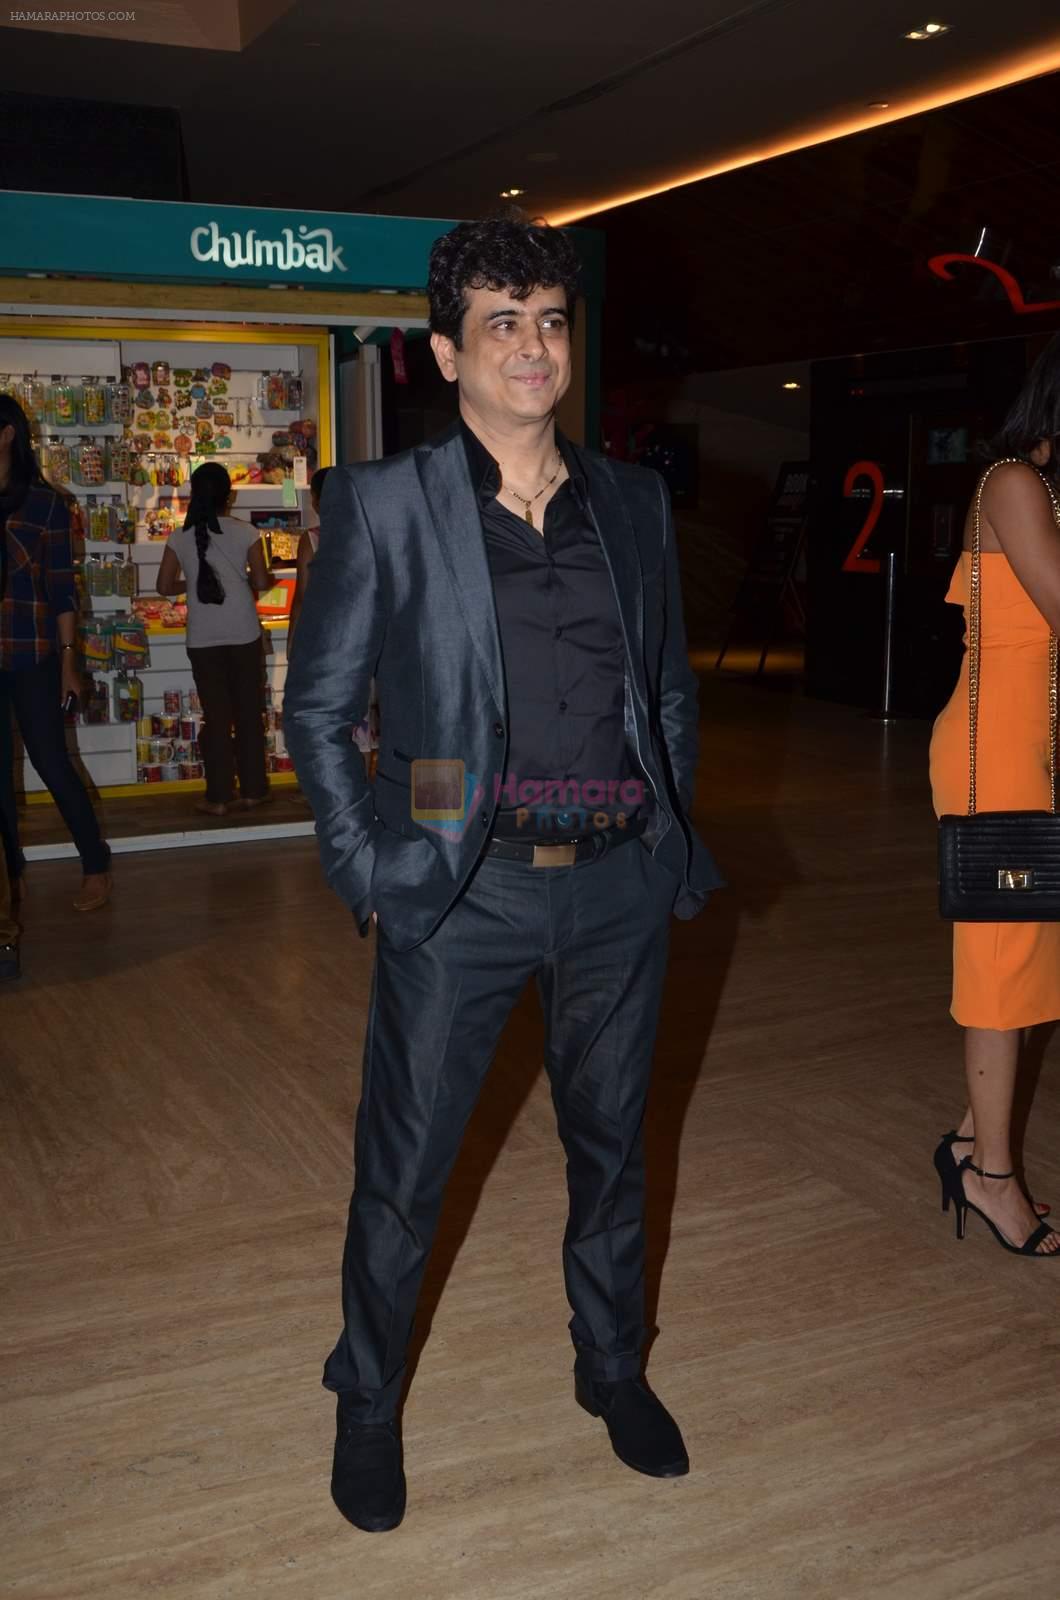 Palash Sen at the Premiere of Aisa Yeh Jahaan in PVR on 23rd July 2015